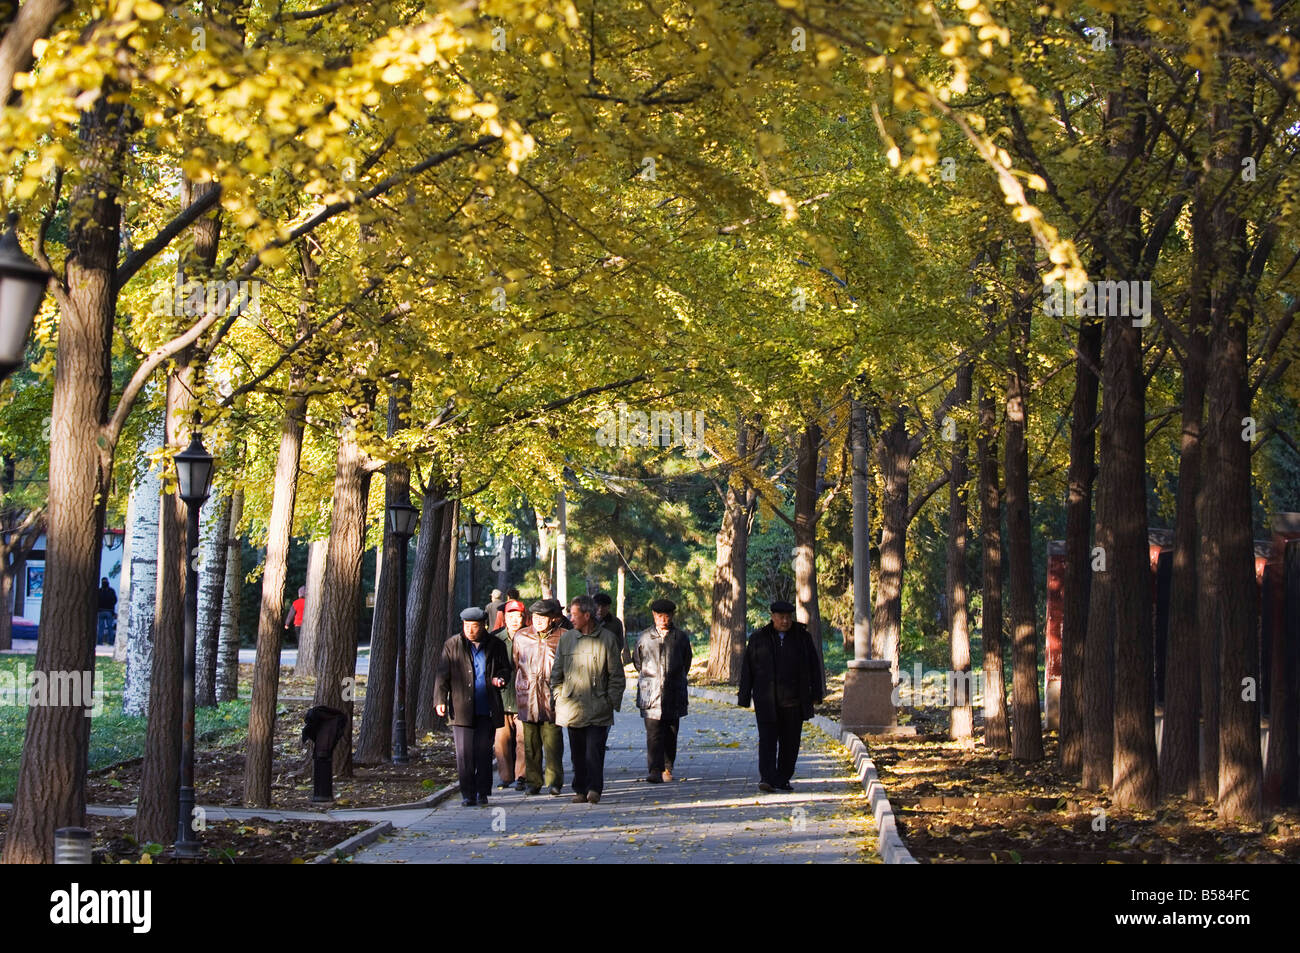 People walking under an avenue of autumn coloured trees in Ritan Park, Beijing, China, Asia Stock Photo